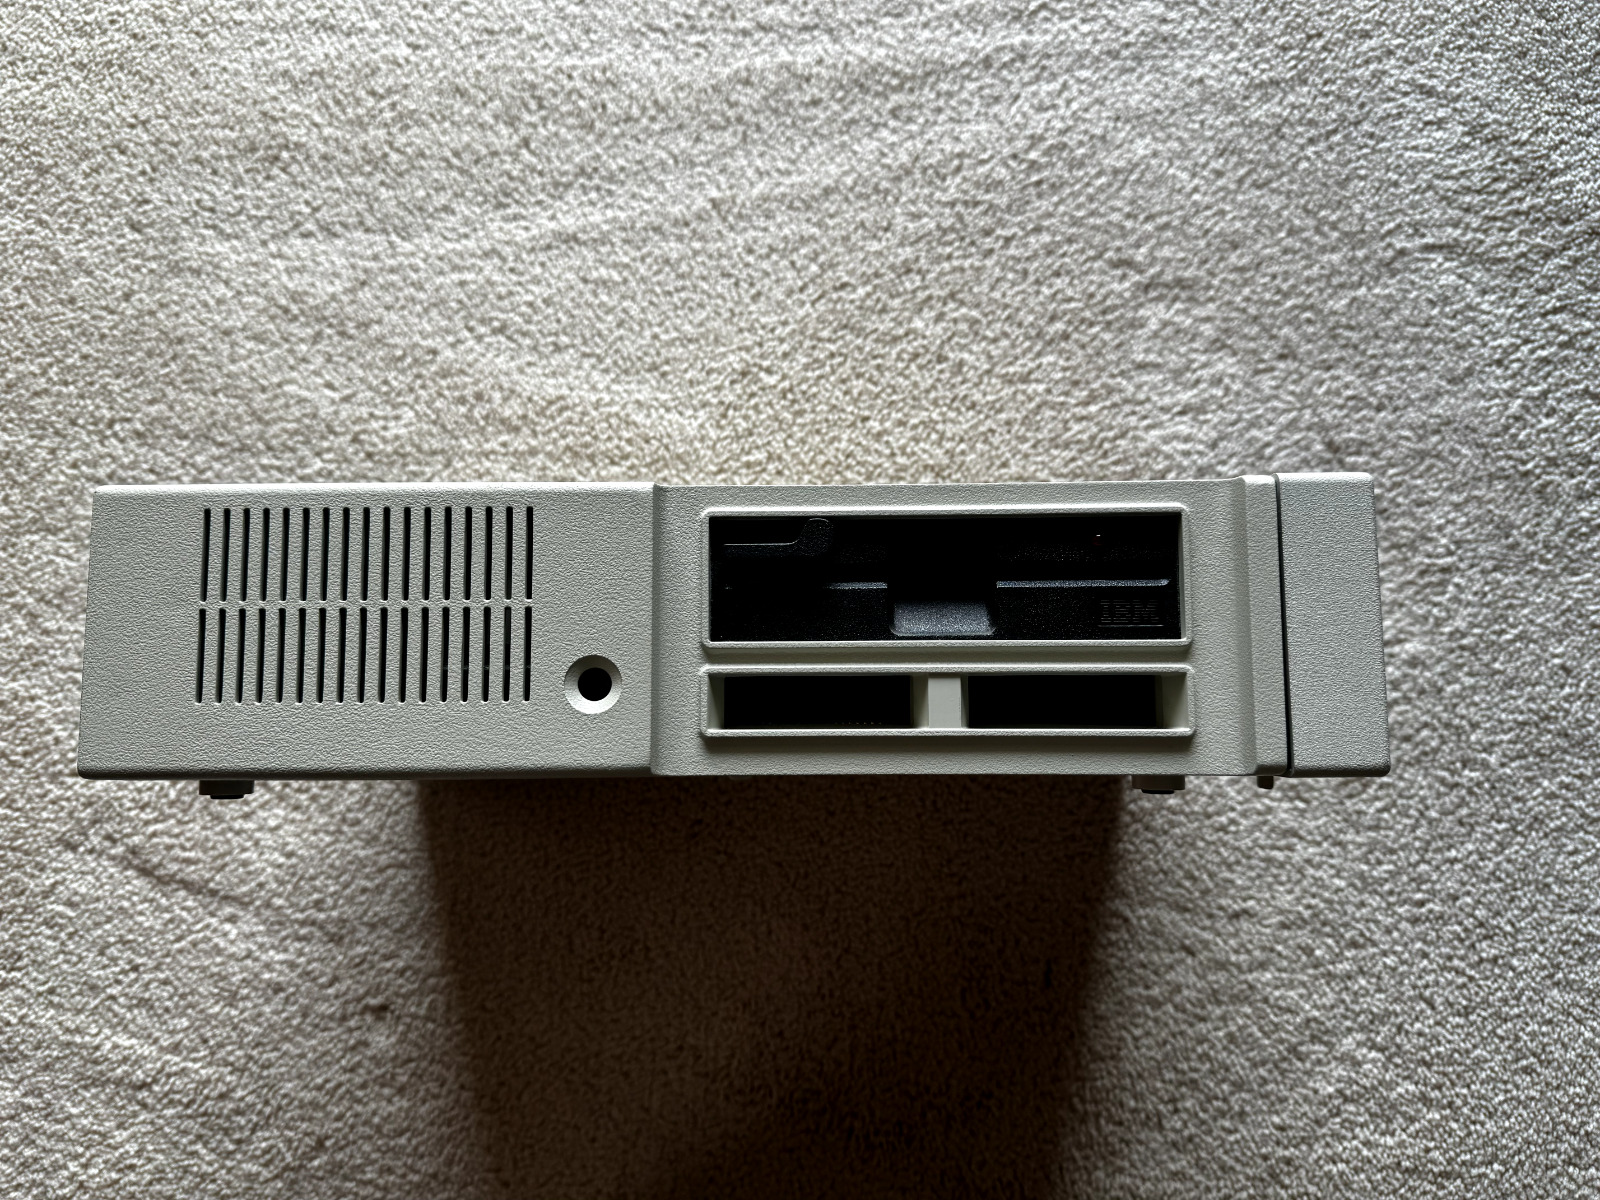 IBM PCjr  computer with extras